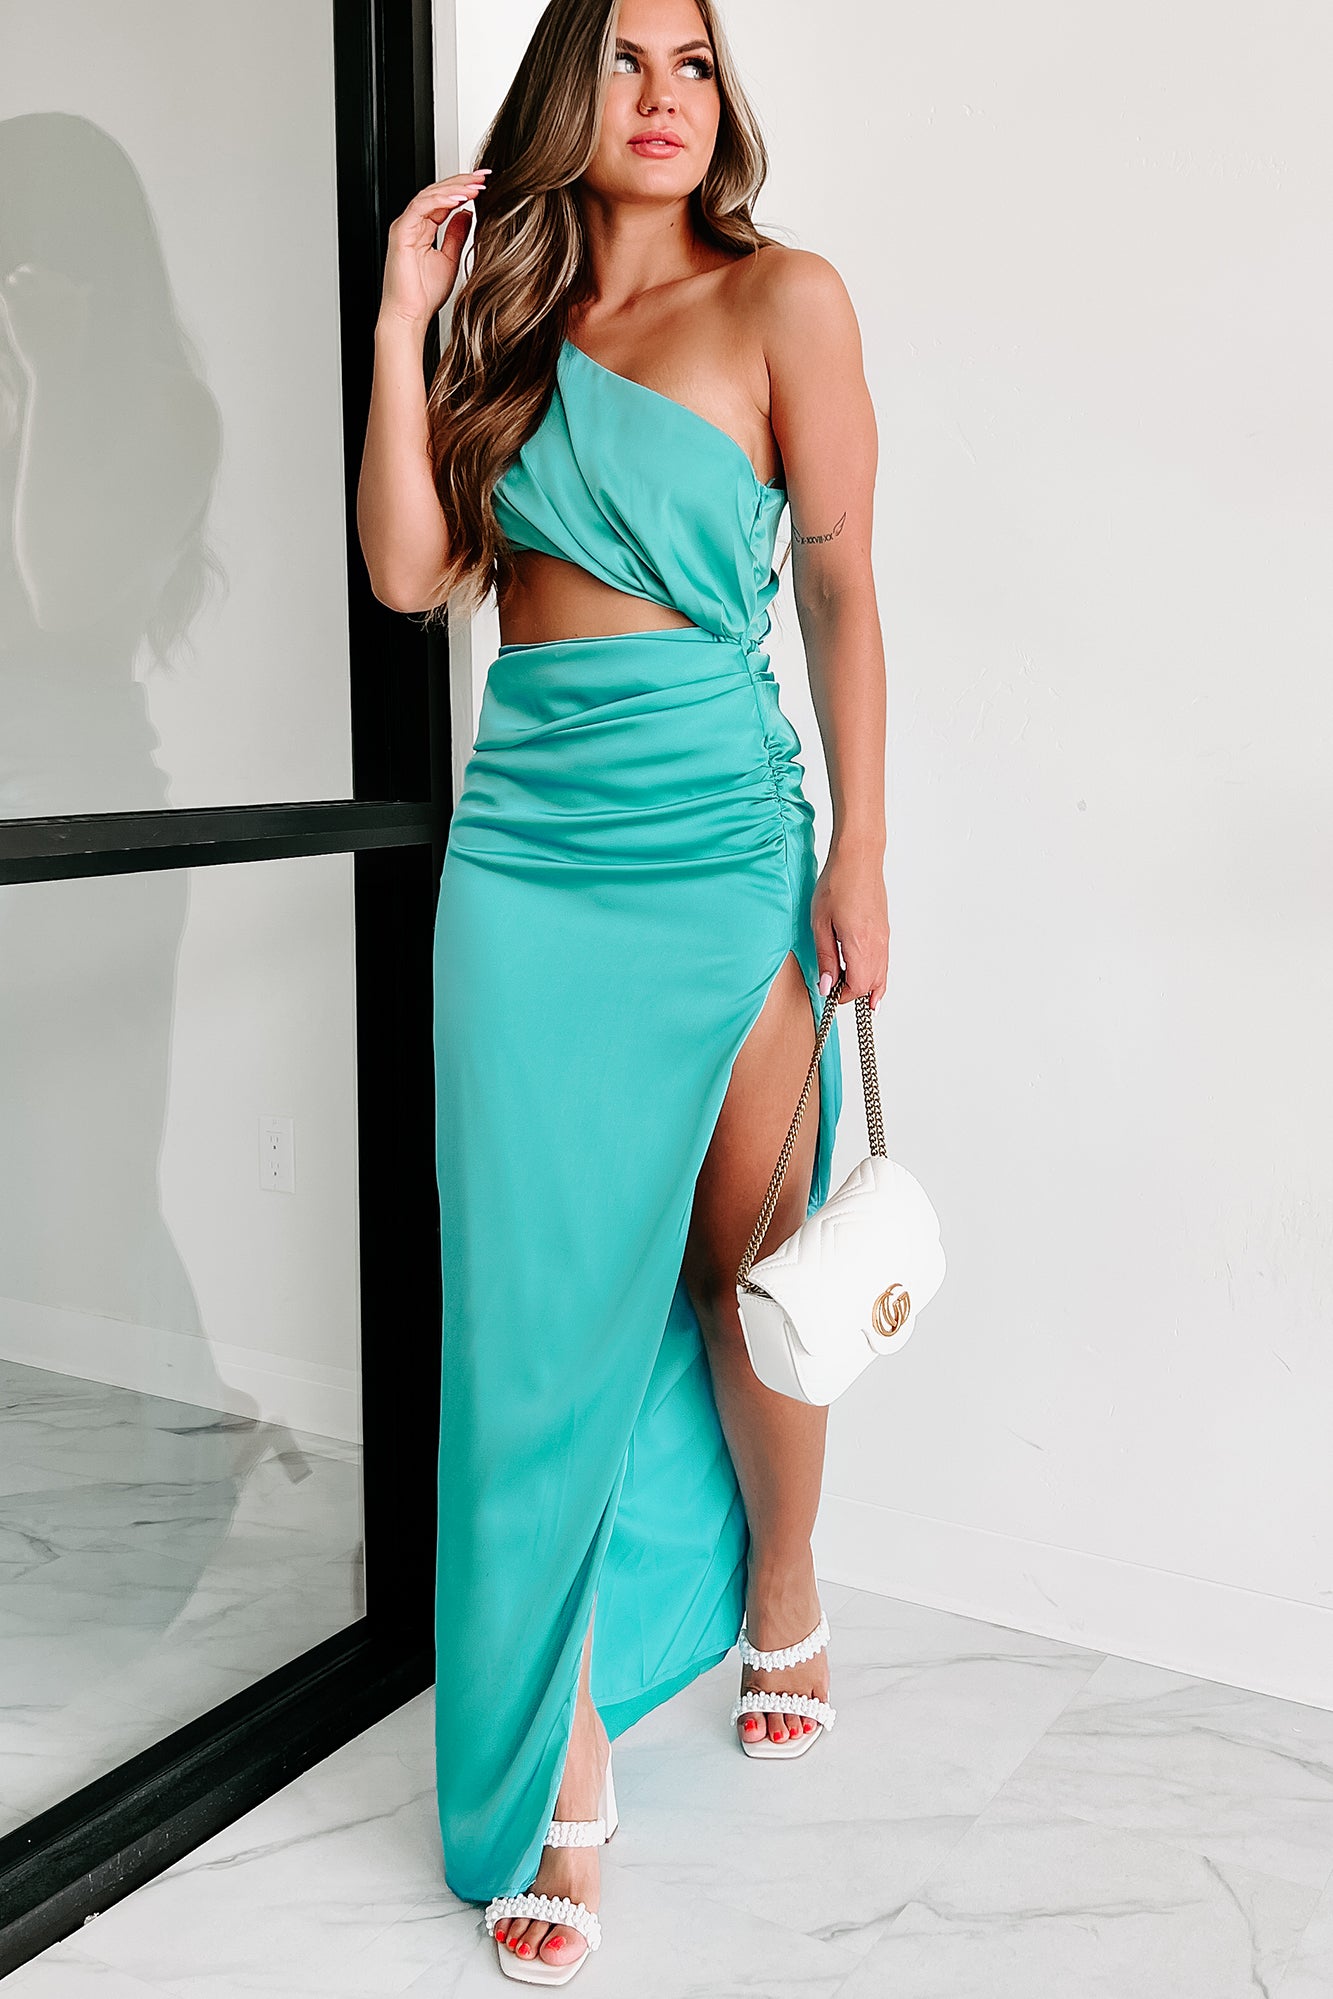 Statuesque Style One Shoulder Cut-Out Satin Dress (Turquoise)